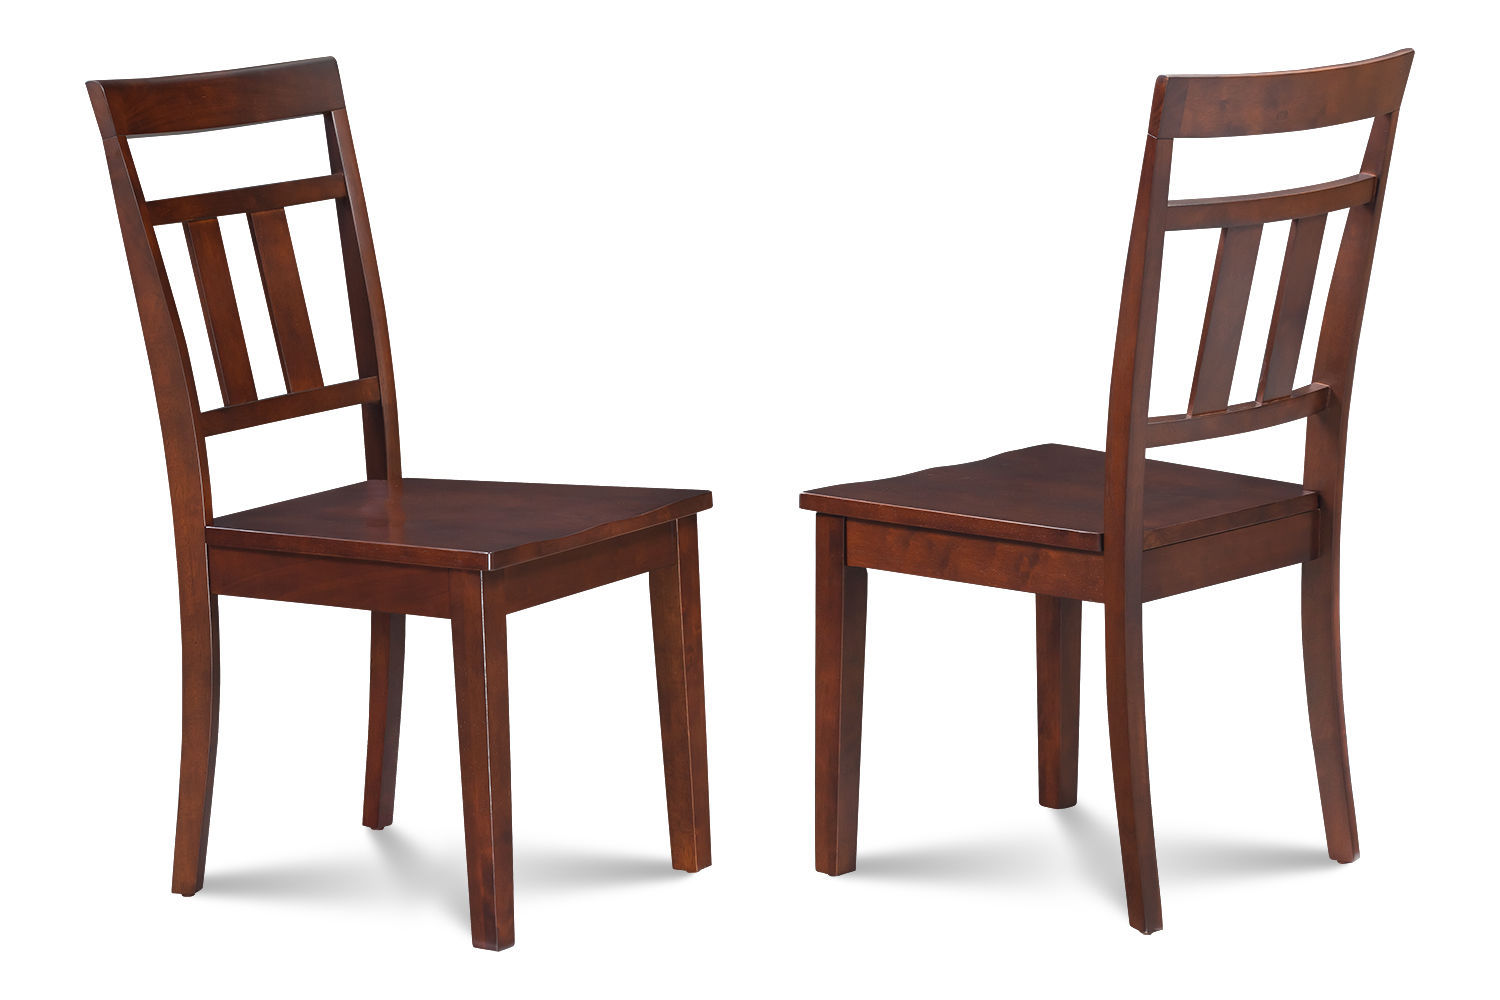 4 KITCHEN DINING SIDE CHAIRS w WOODEN SEAT IN MAHOGANY 